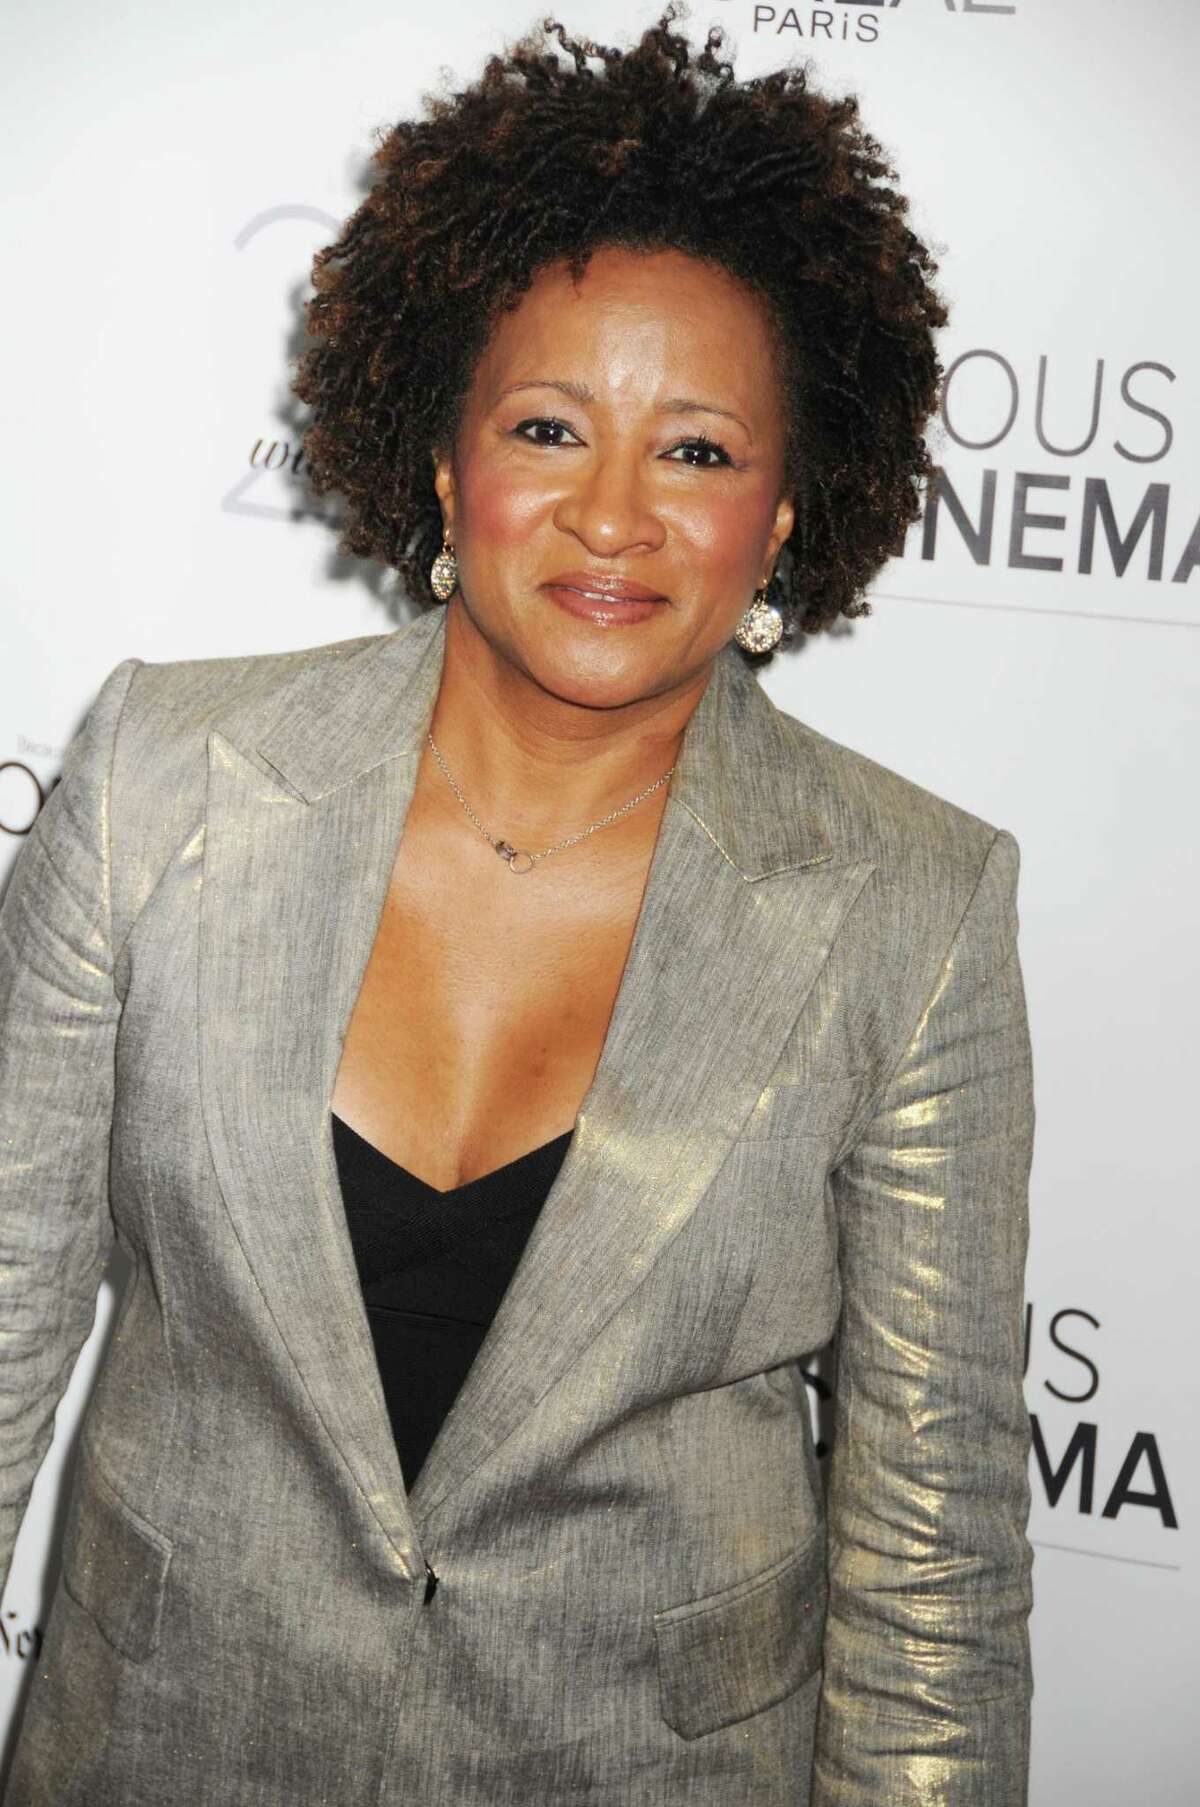 Wanda Sykes tweeted that she was leaving the “Roseanne” revival following a tweet by Roseanne Barr in which she made a racially charged insult about an Obama aide.